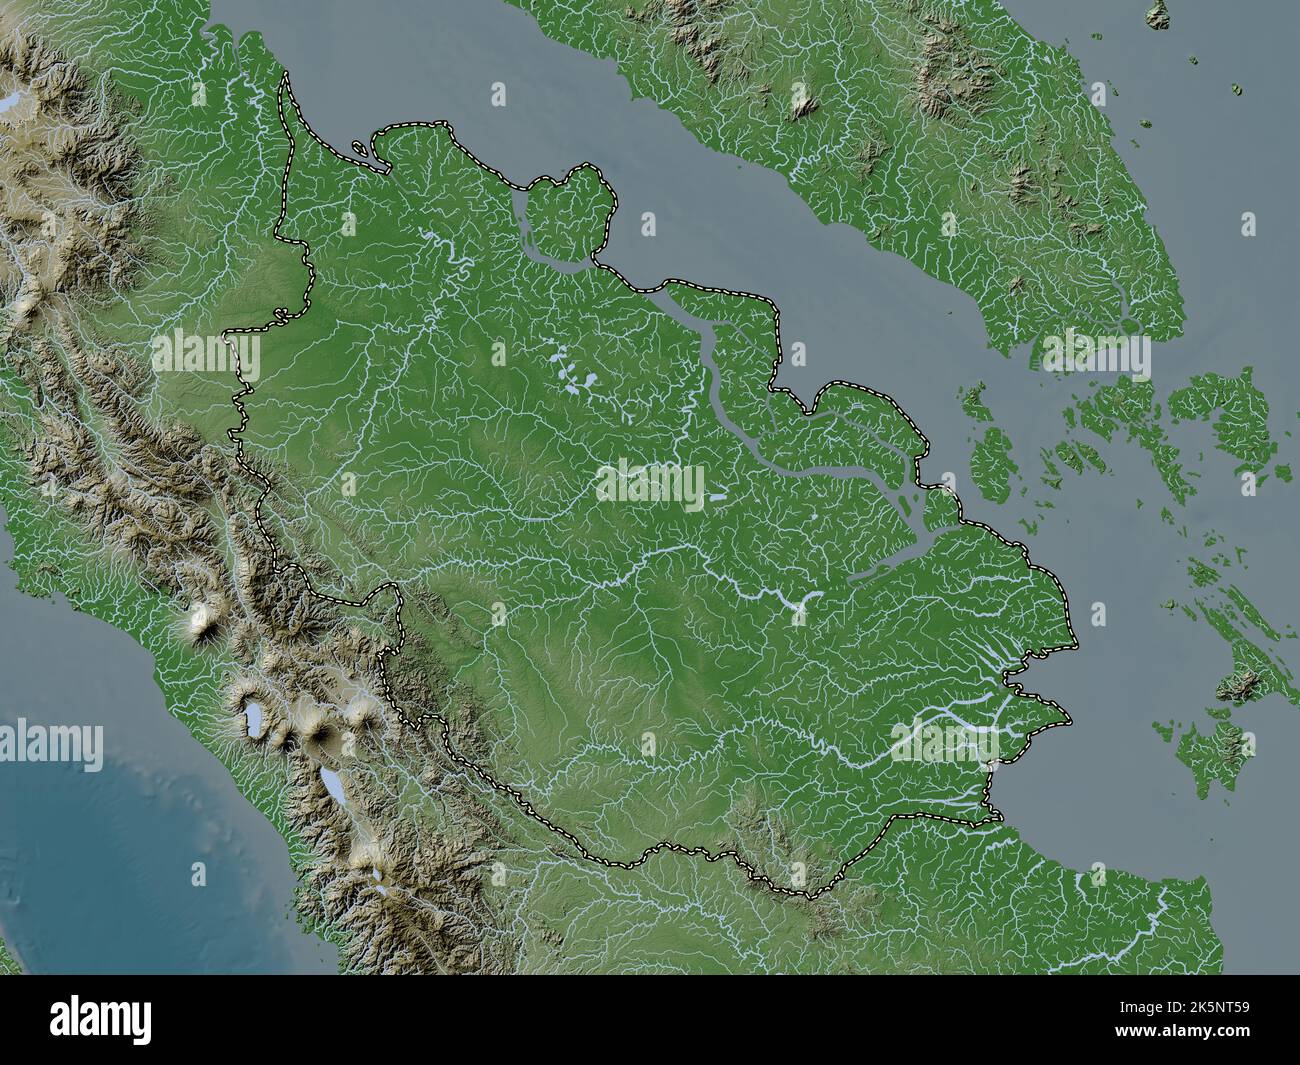 Riau, province of Indonesia. Elevation map colored in wiki style with lakes and rivers Stock Photo